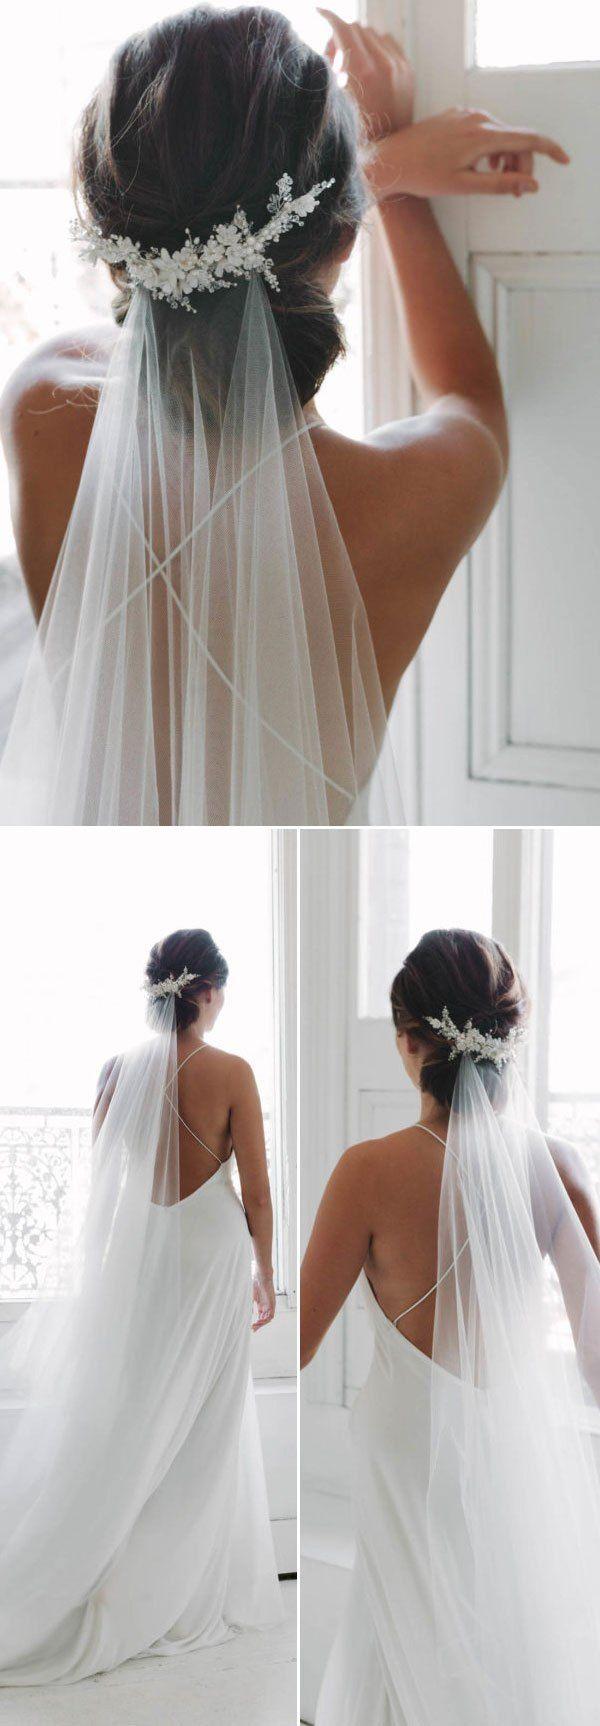 Mariage - Top 20 Wedding Hairstyles With Veils And Accessories